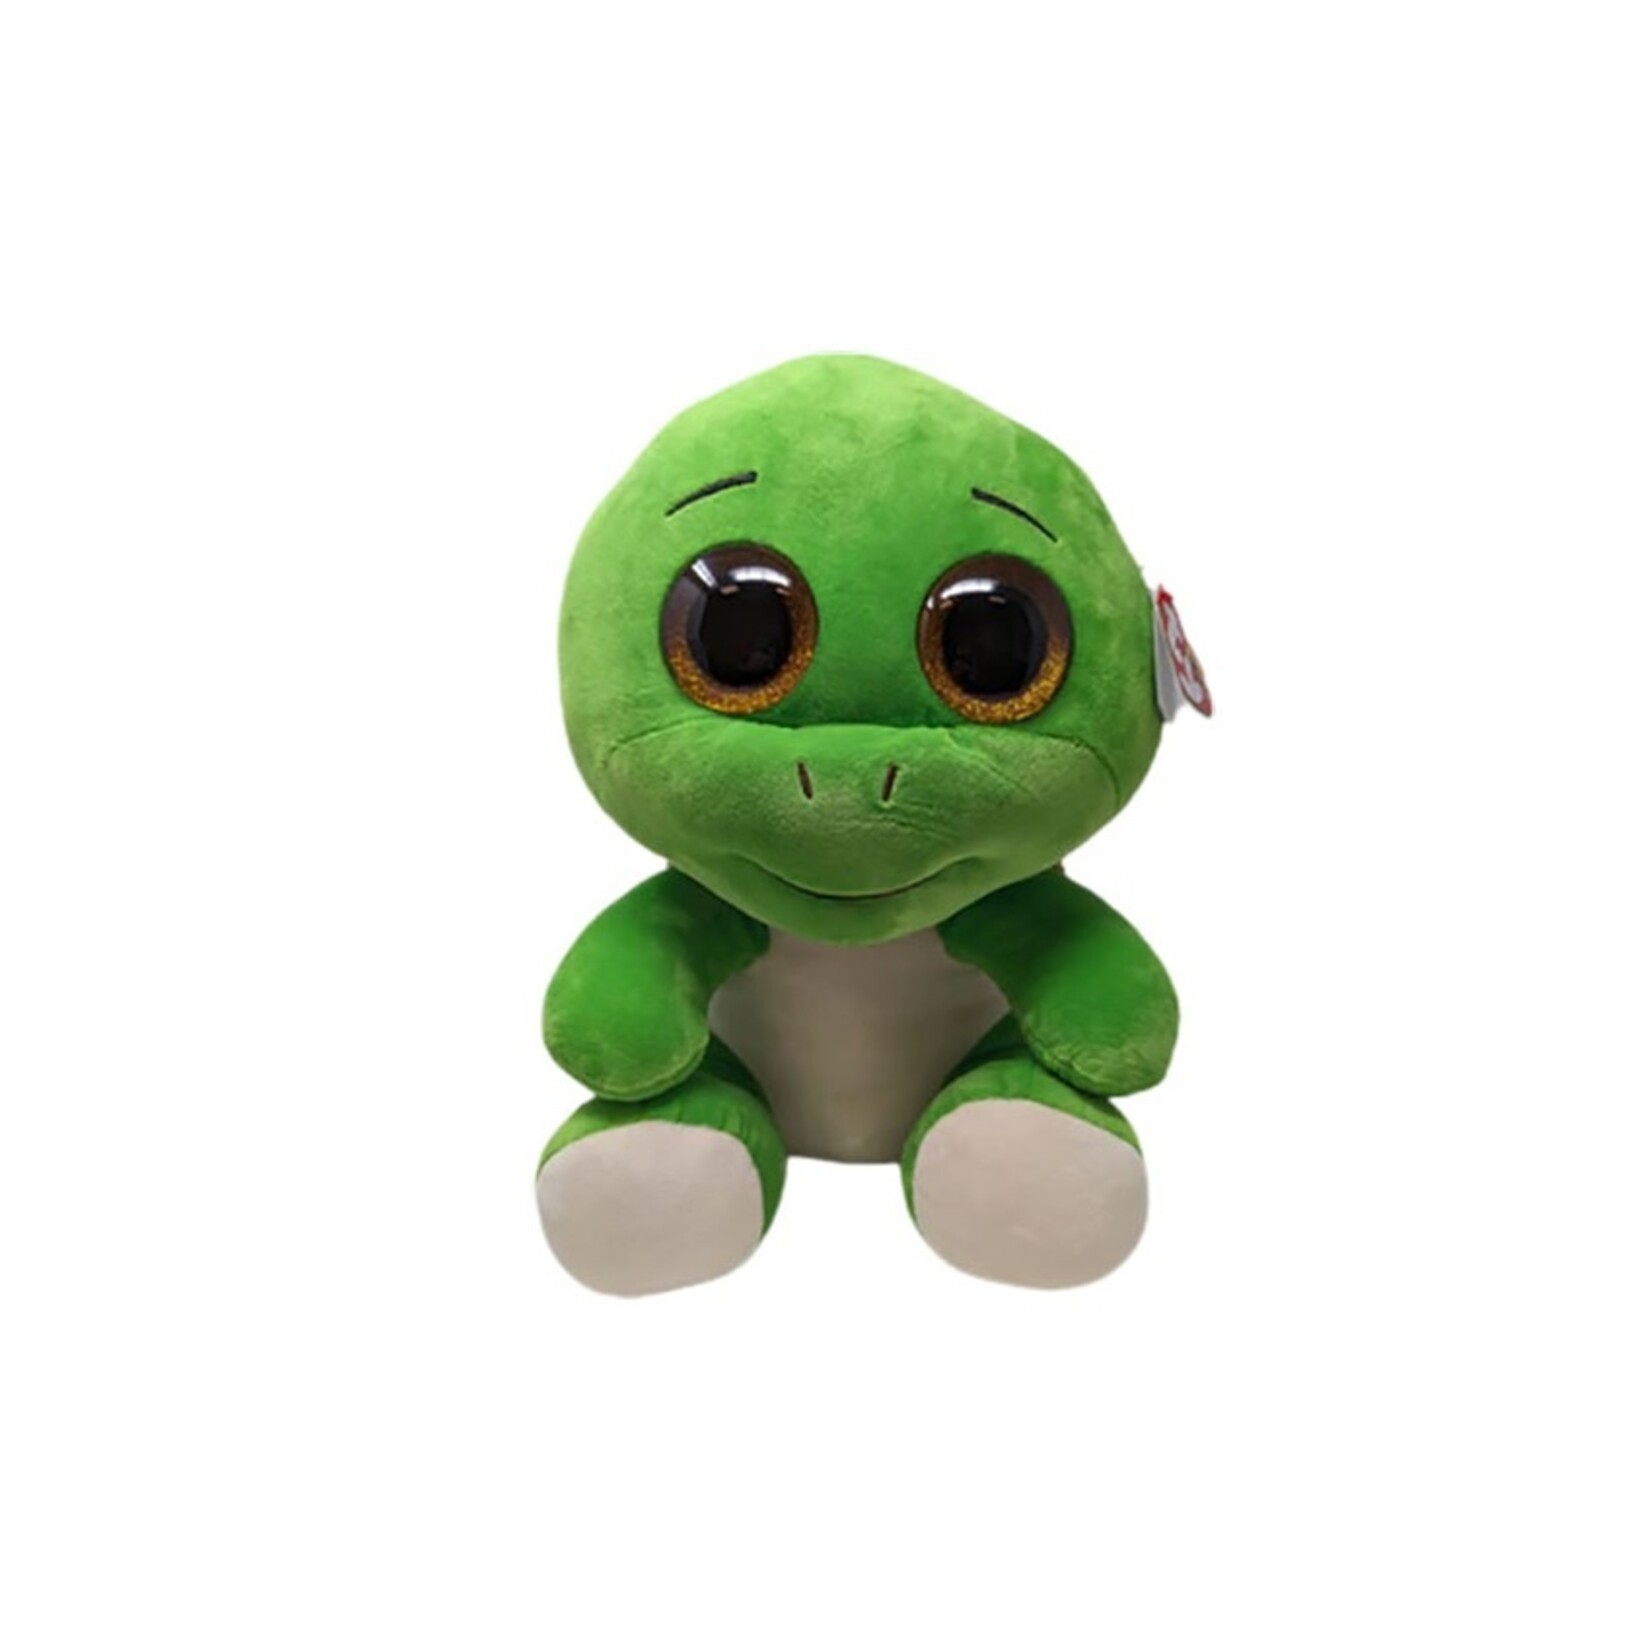 TY TY - Turbo - Turtle green large